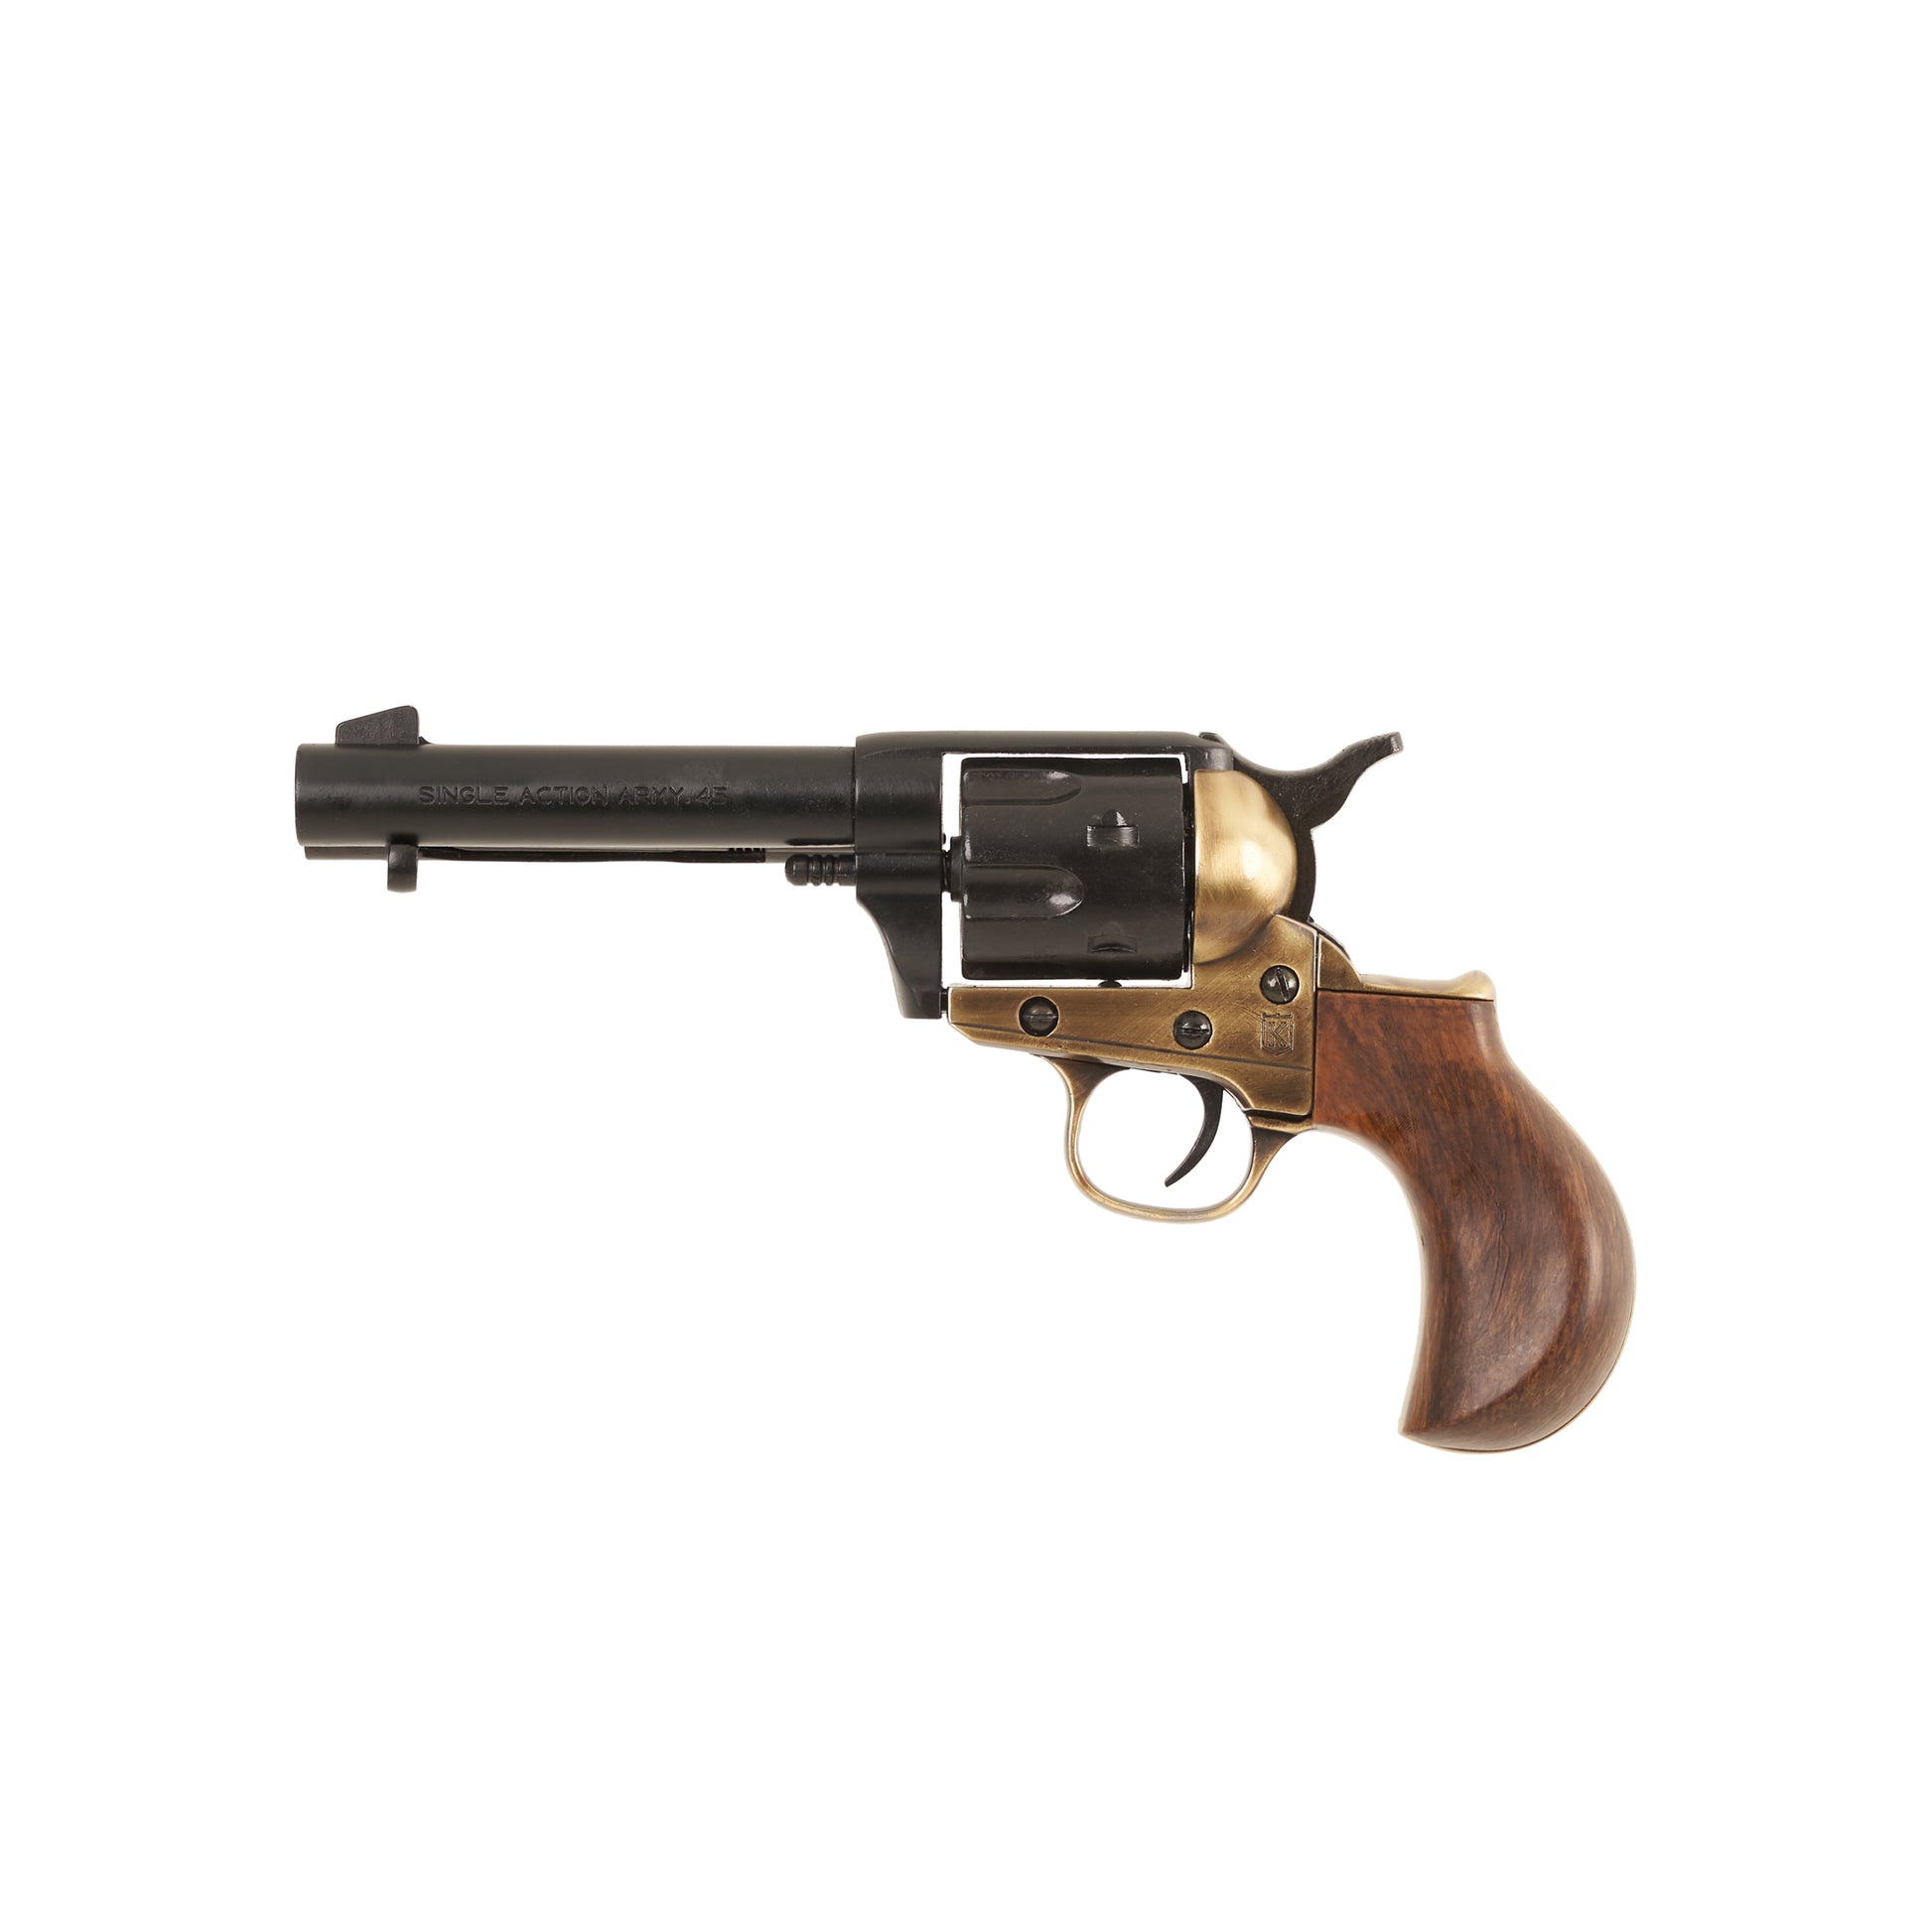 Left side view of black and brass Pre-1896 Thunderer Revolver with wood grip.